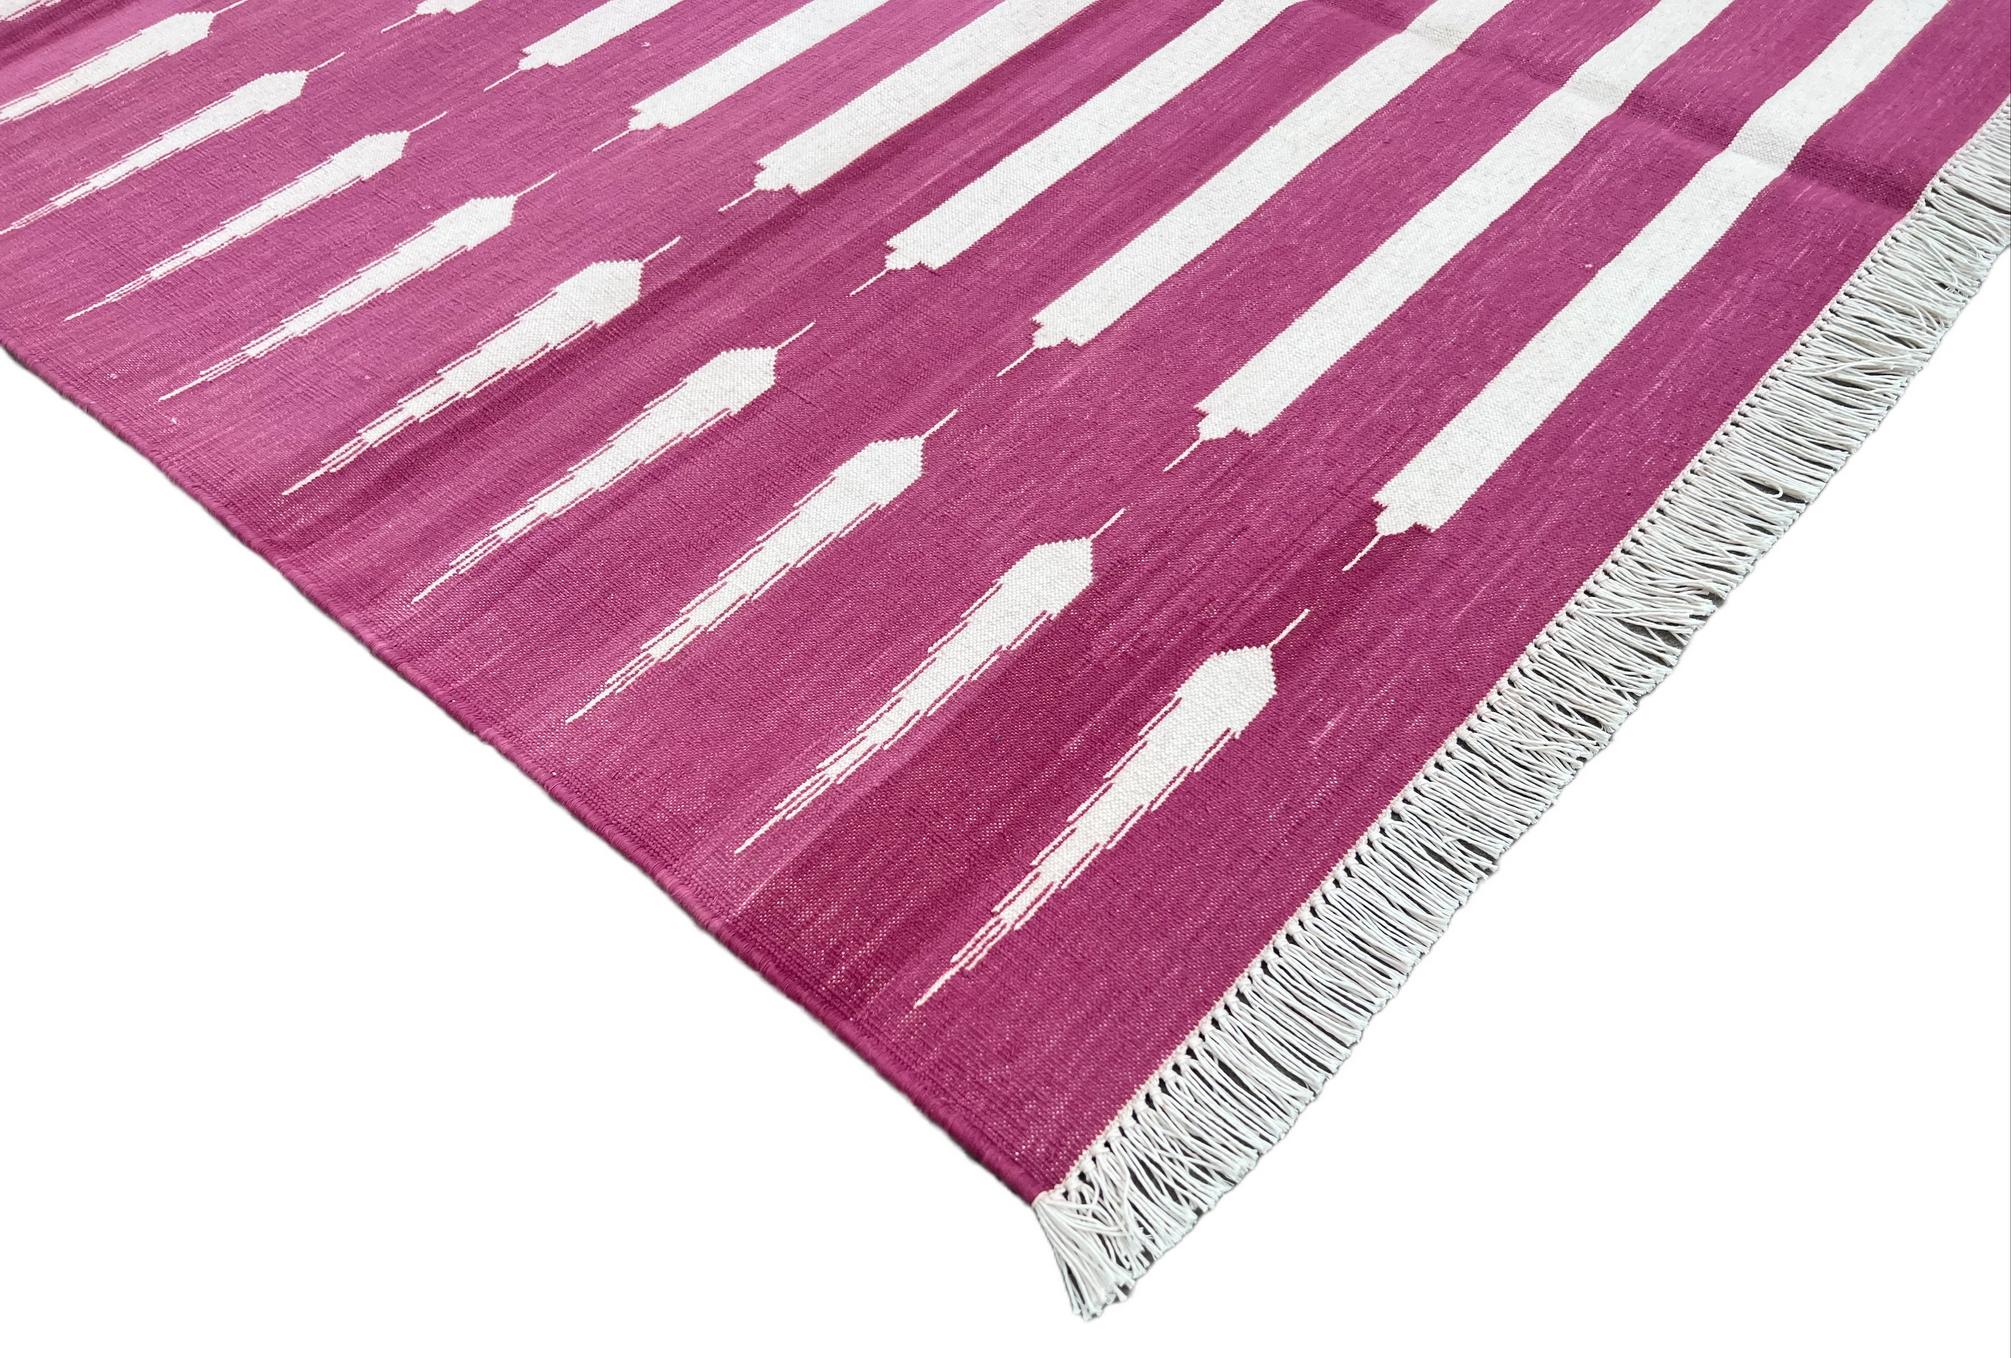 Mid-Century Modern Handmade Cotton Area Flat Weave Rug, 4x6 Pink And White Striped Indian Dhurrie For Sale